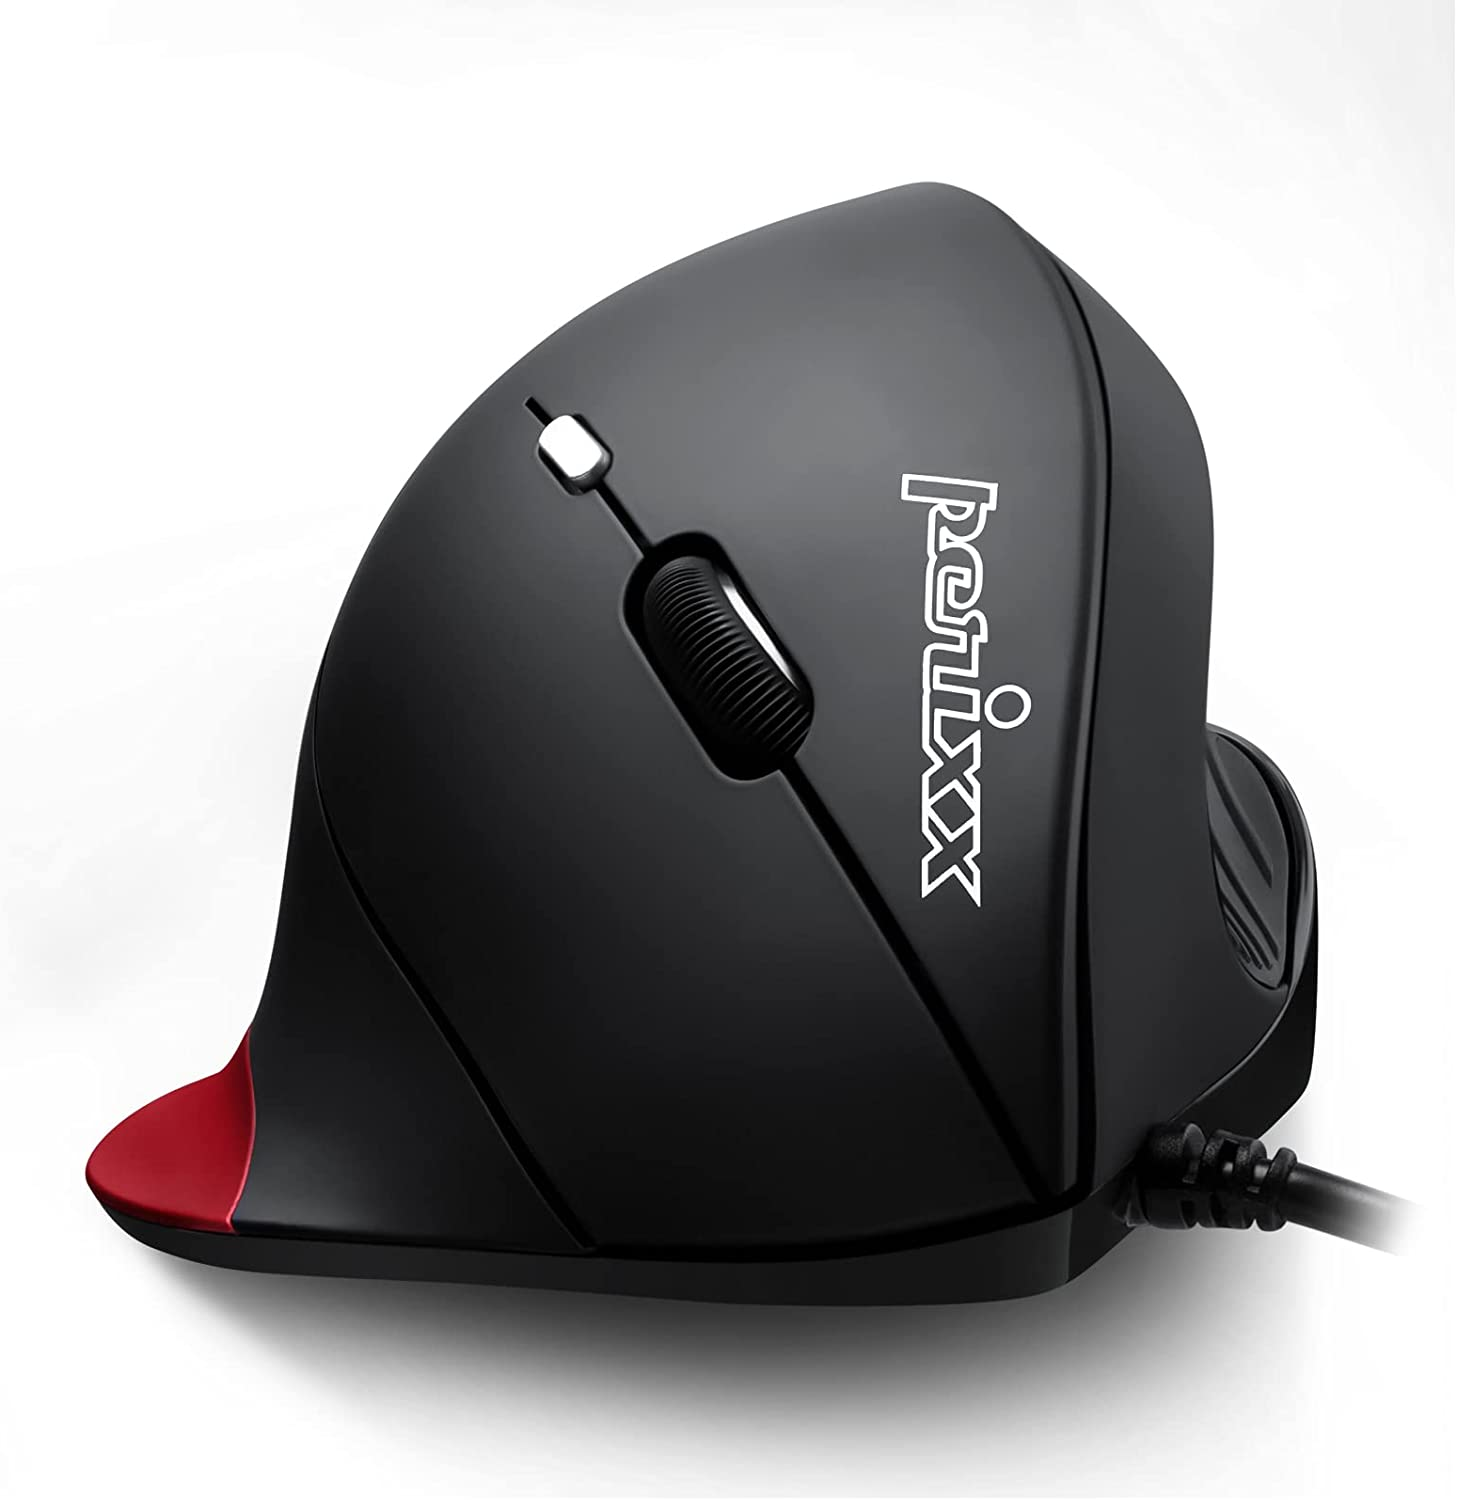 Perix Wired Vertical USB Mouse, 6 Buttons and 2 Level 1000/1600 DPI, Right Handed Design